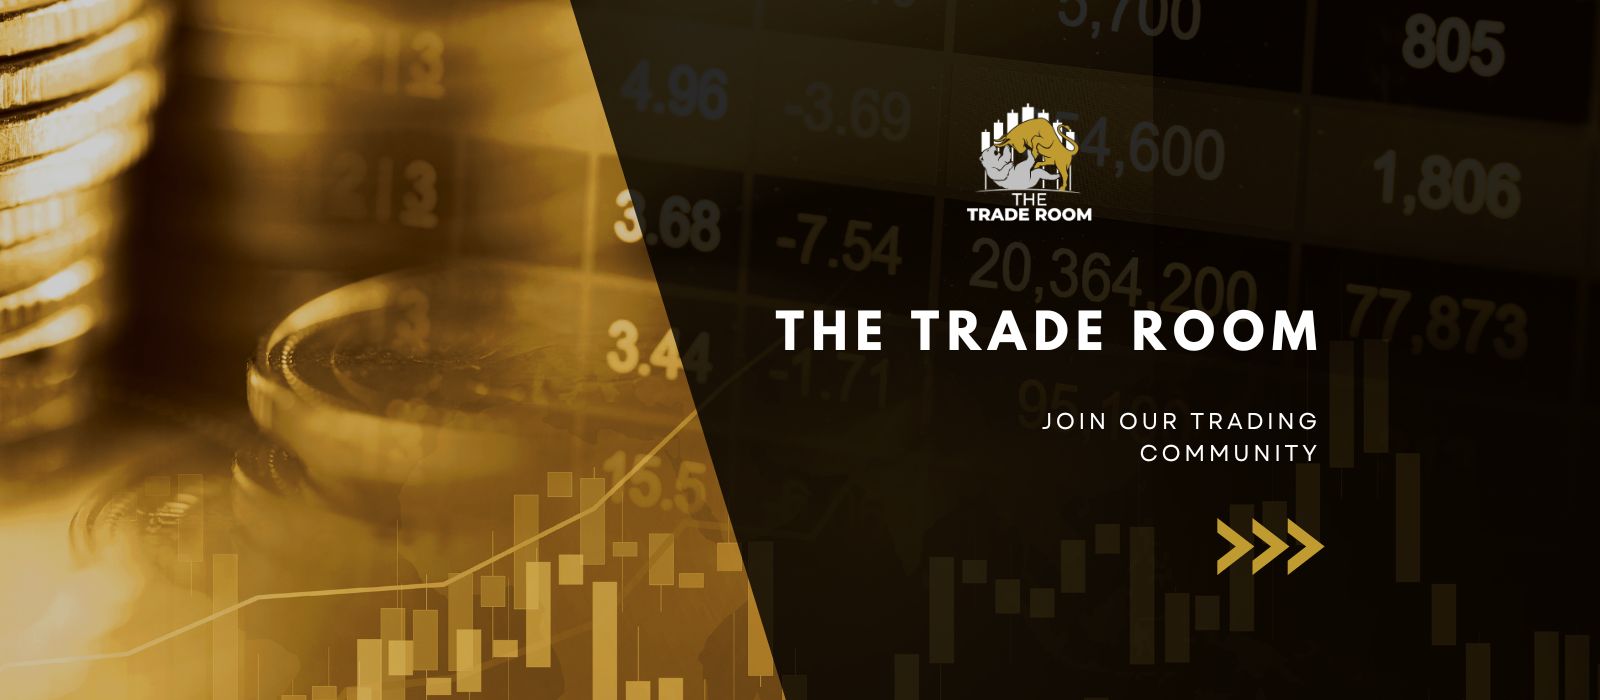 sa traders community the trade room south africa 